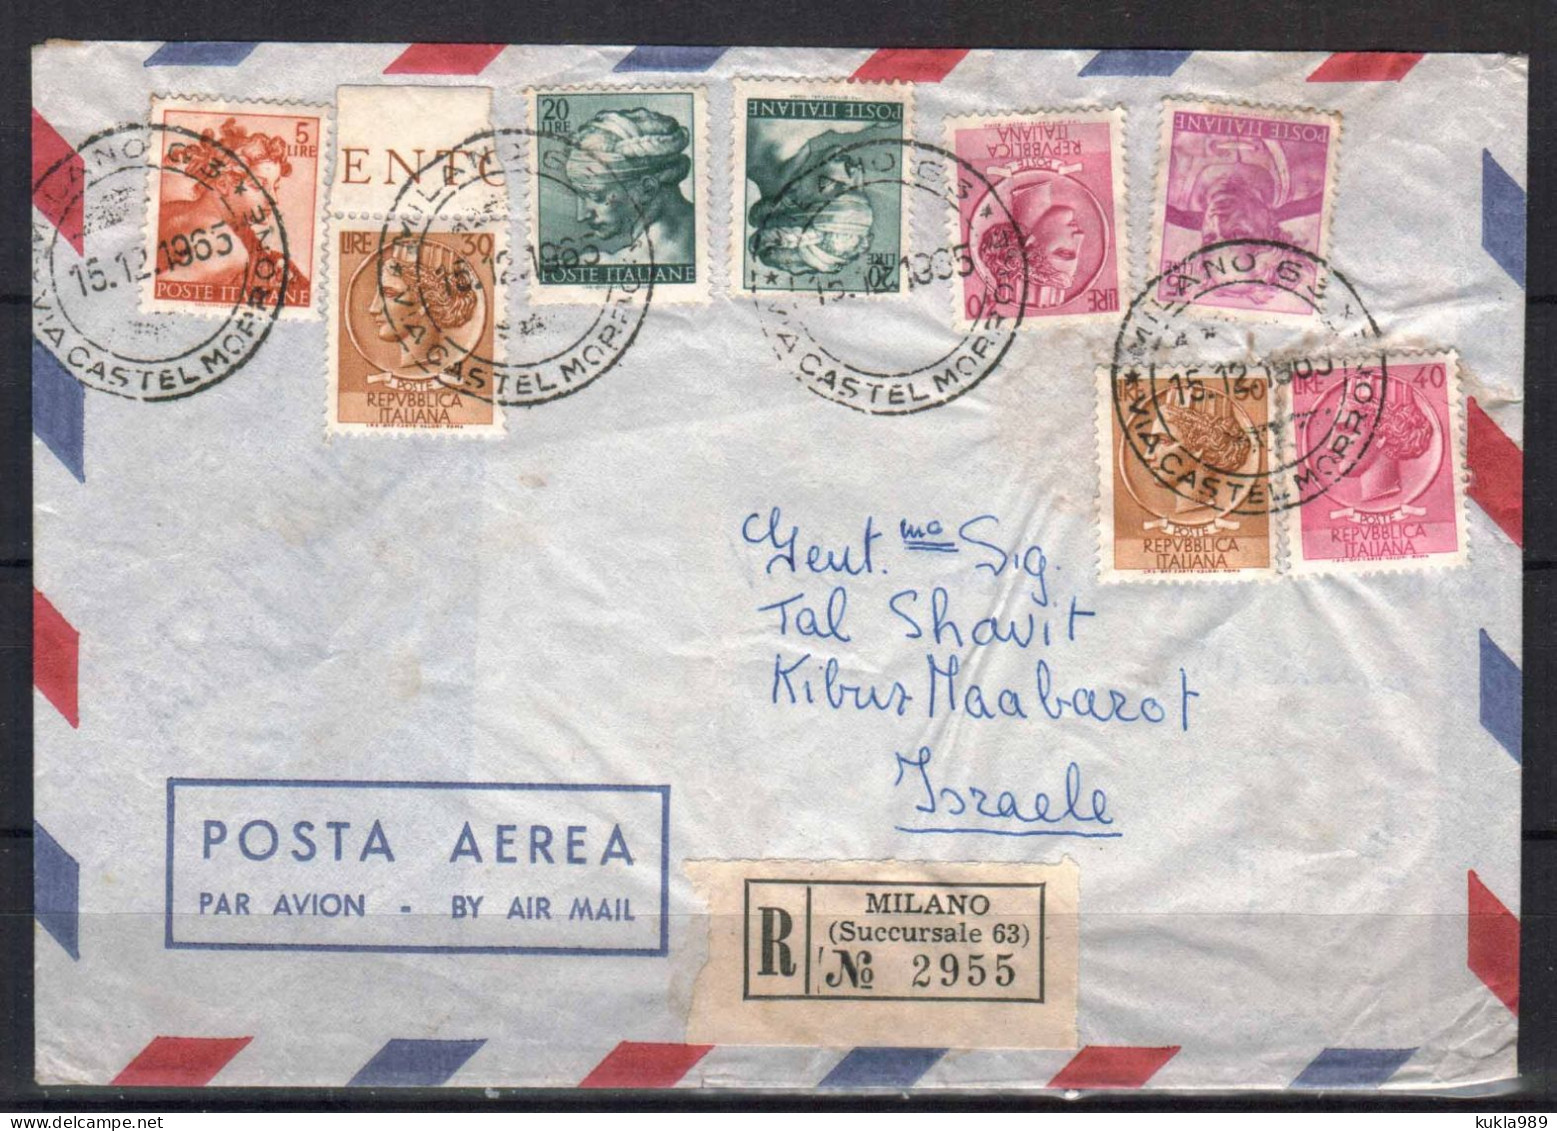 ITALY STAMPS. 1965 REG. COVER TO ISRAEL - Correo Aéreo